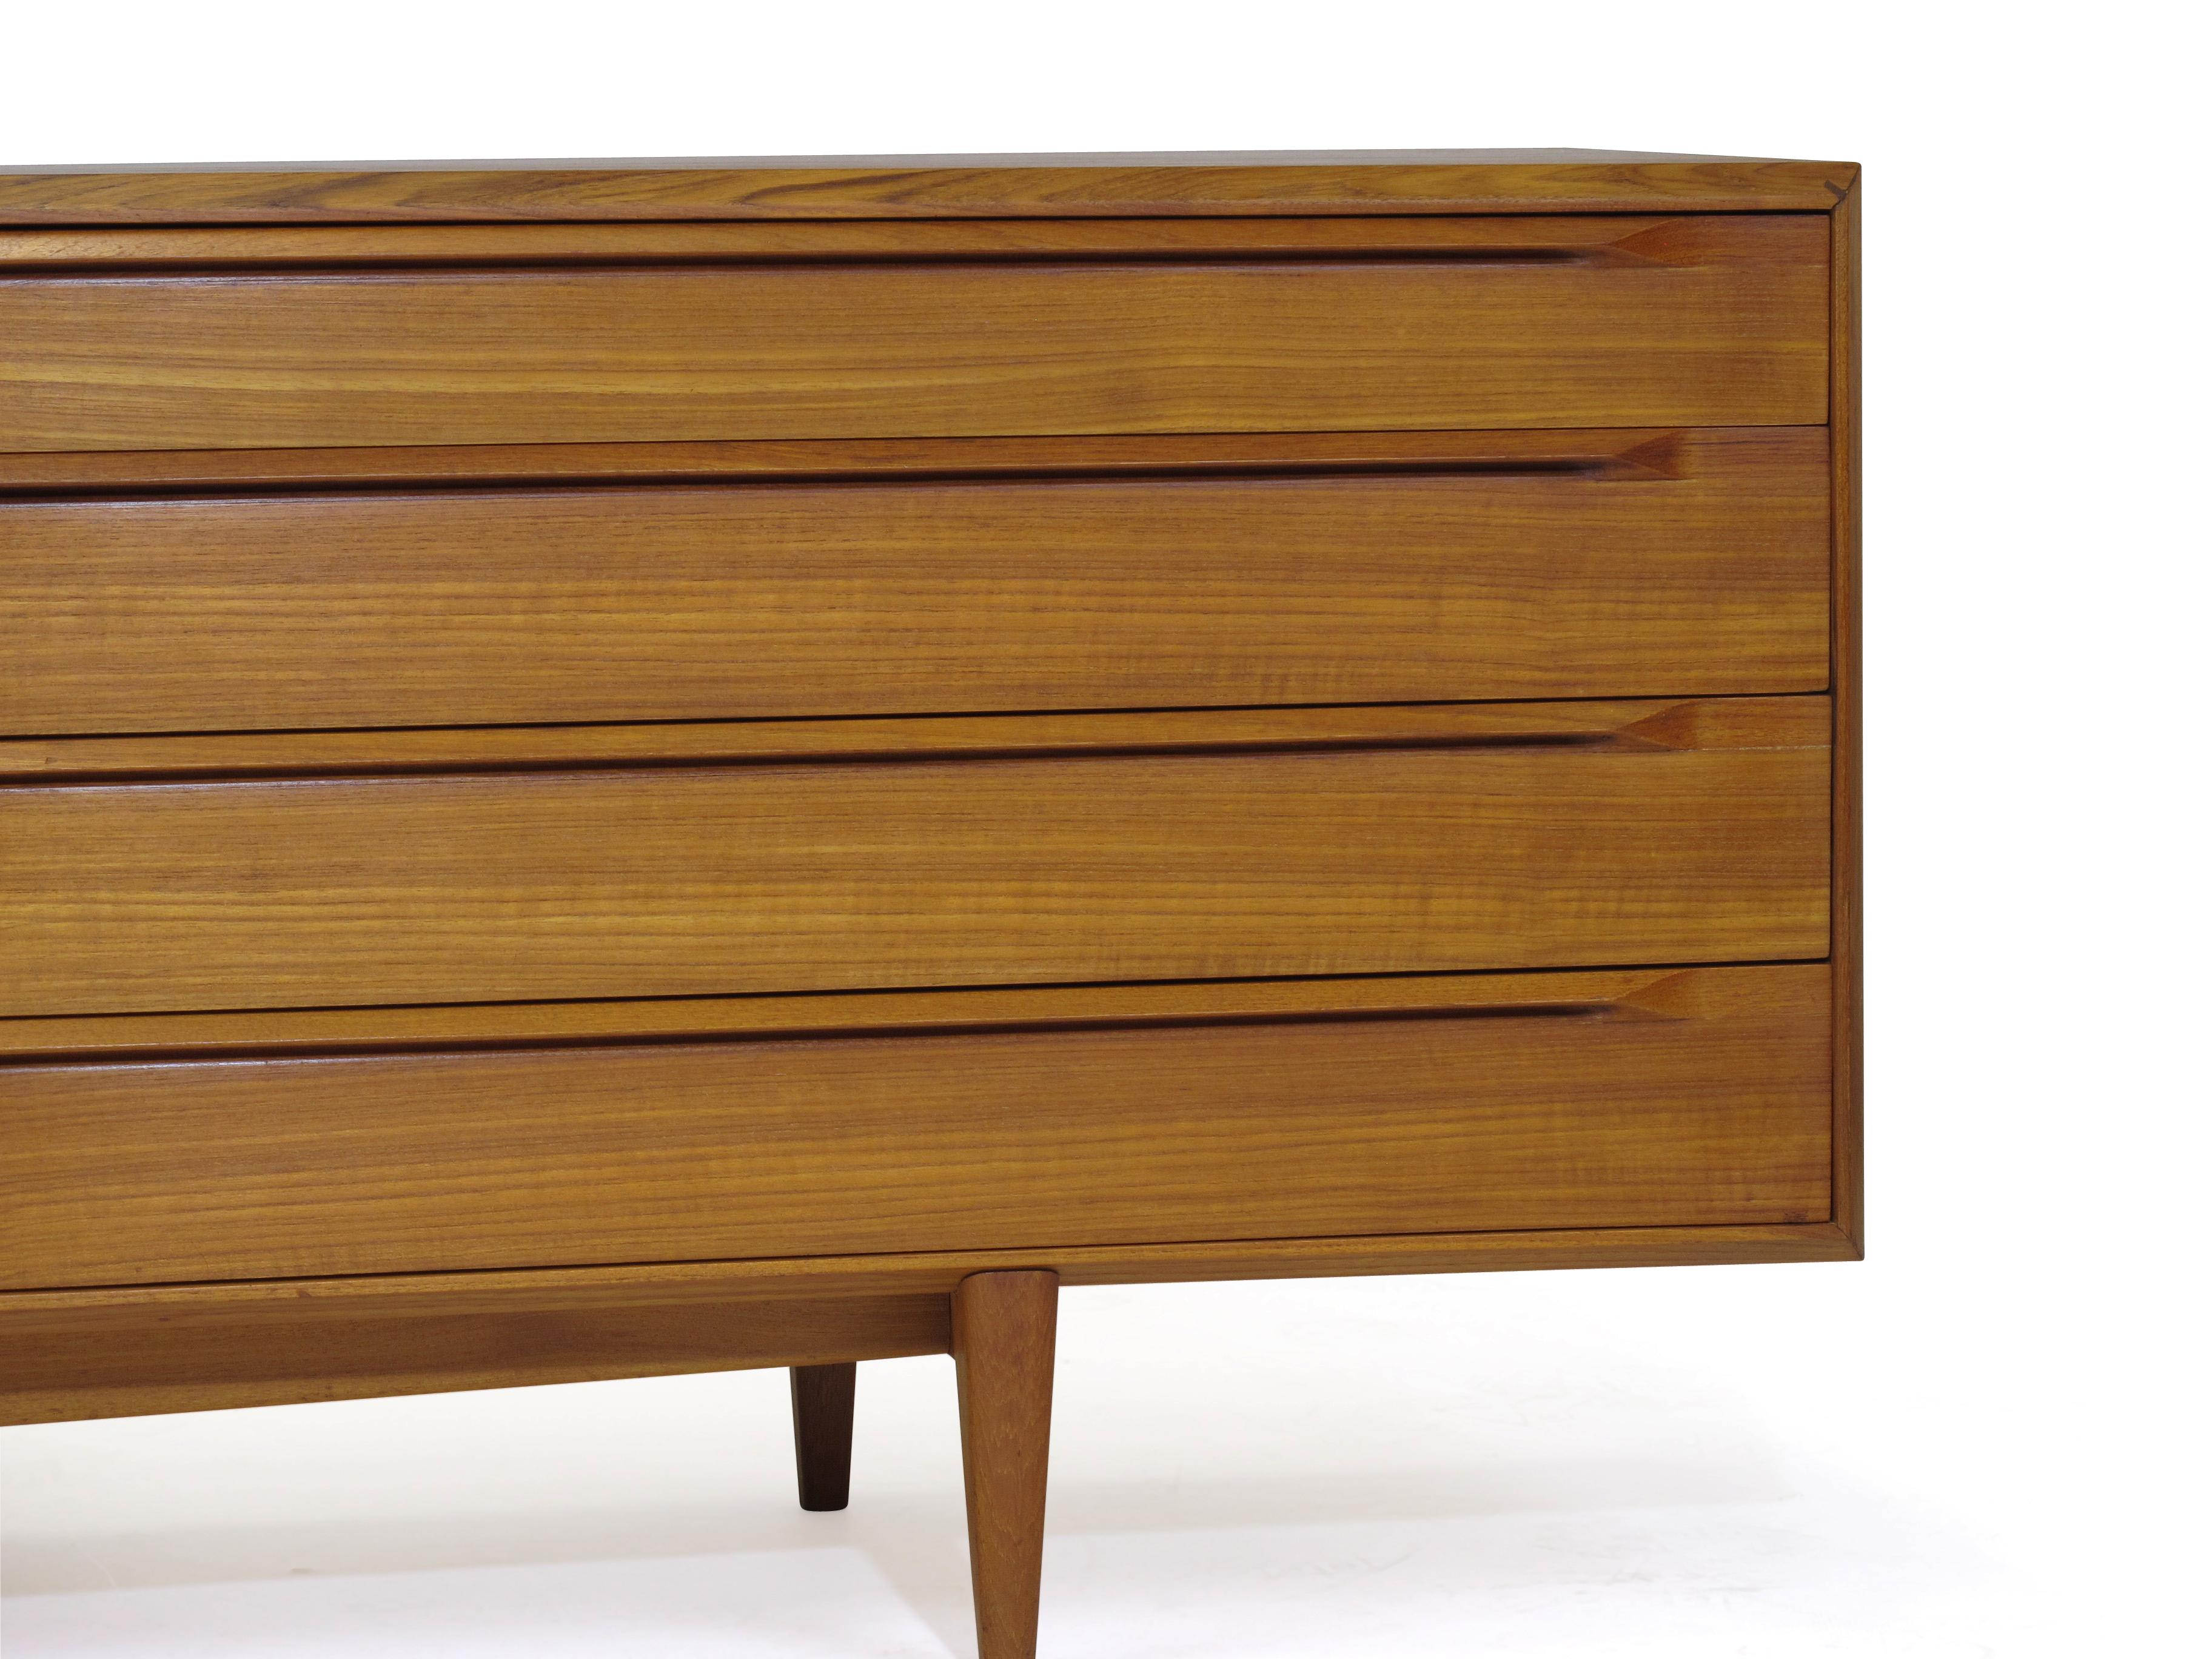 Teak dresser designed by IB Kofoed Larsen for Fredericia Moblefabrik model 249, circa 1960 Denmark. Dresser crafted of teak with finely mitered edges and eight drawers with sculpted hand pulls, raised on solid teak base and legs.